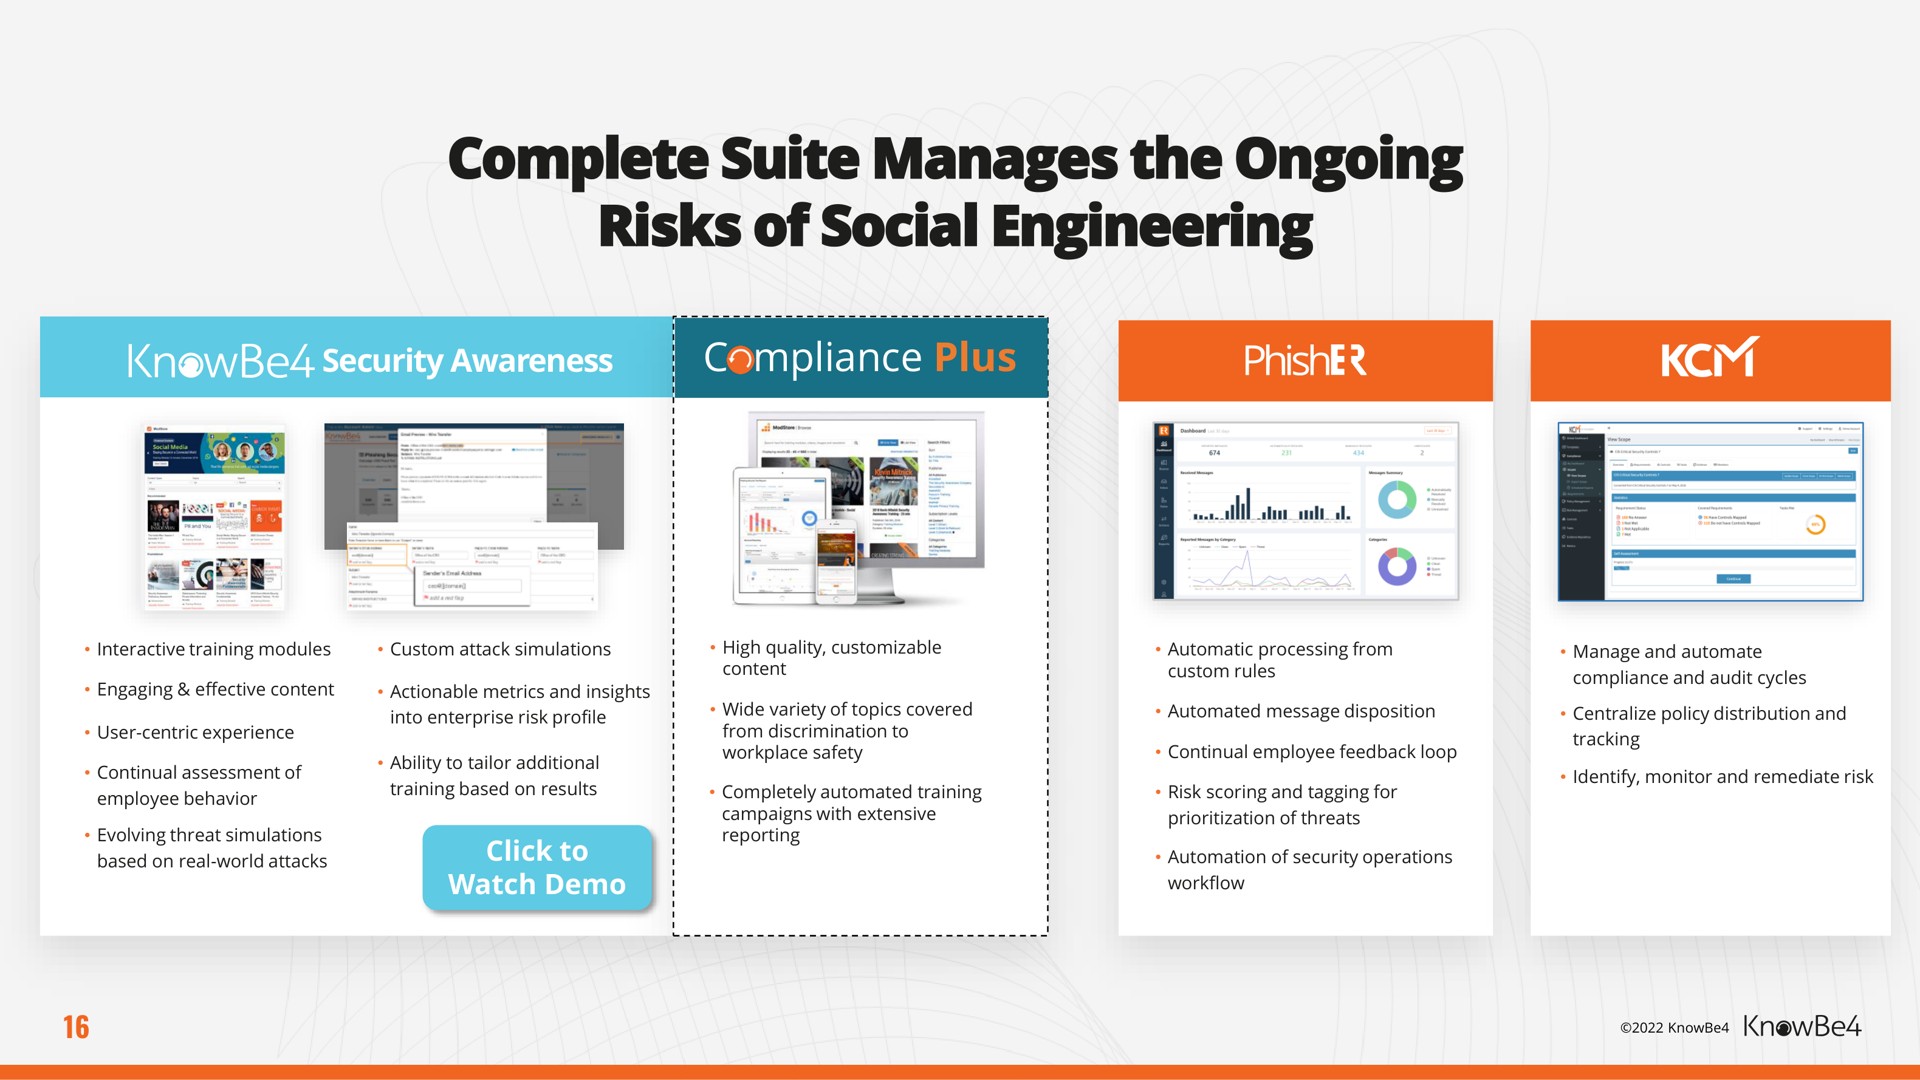 complete suite manages the ongoing risks of social engineering | KnowBe4